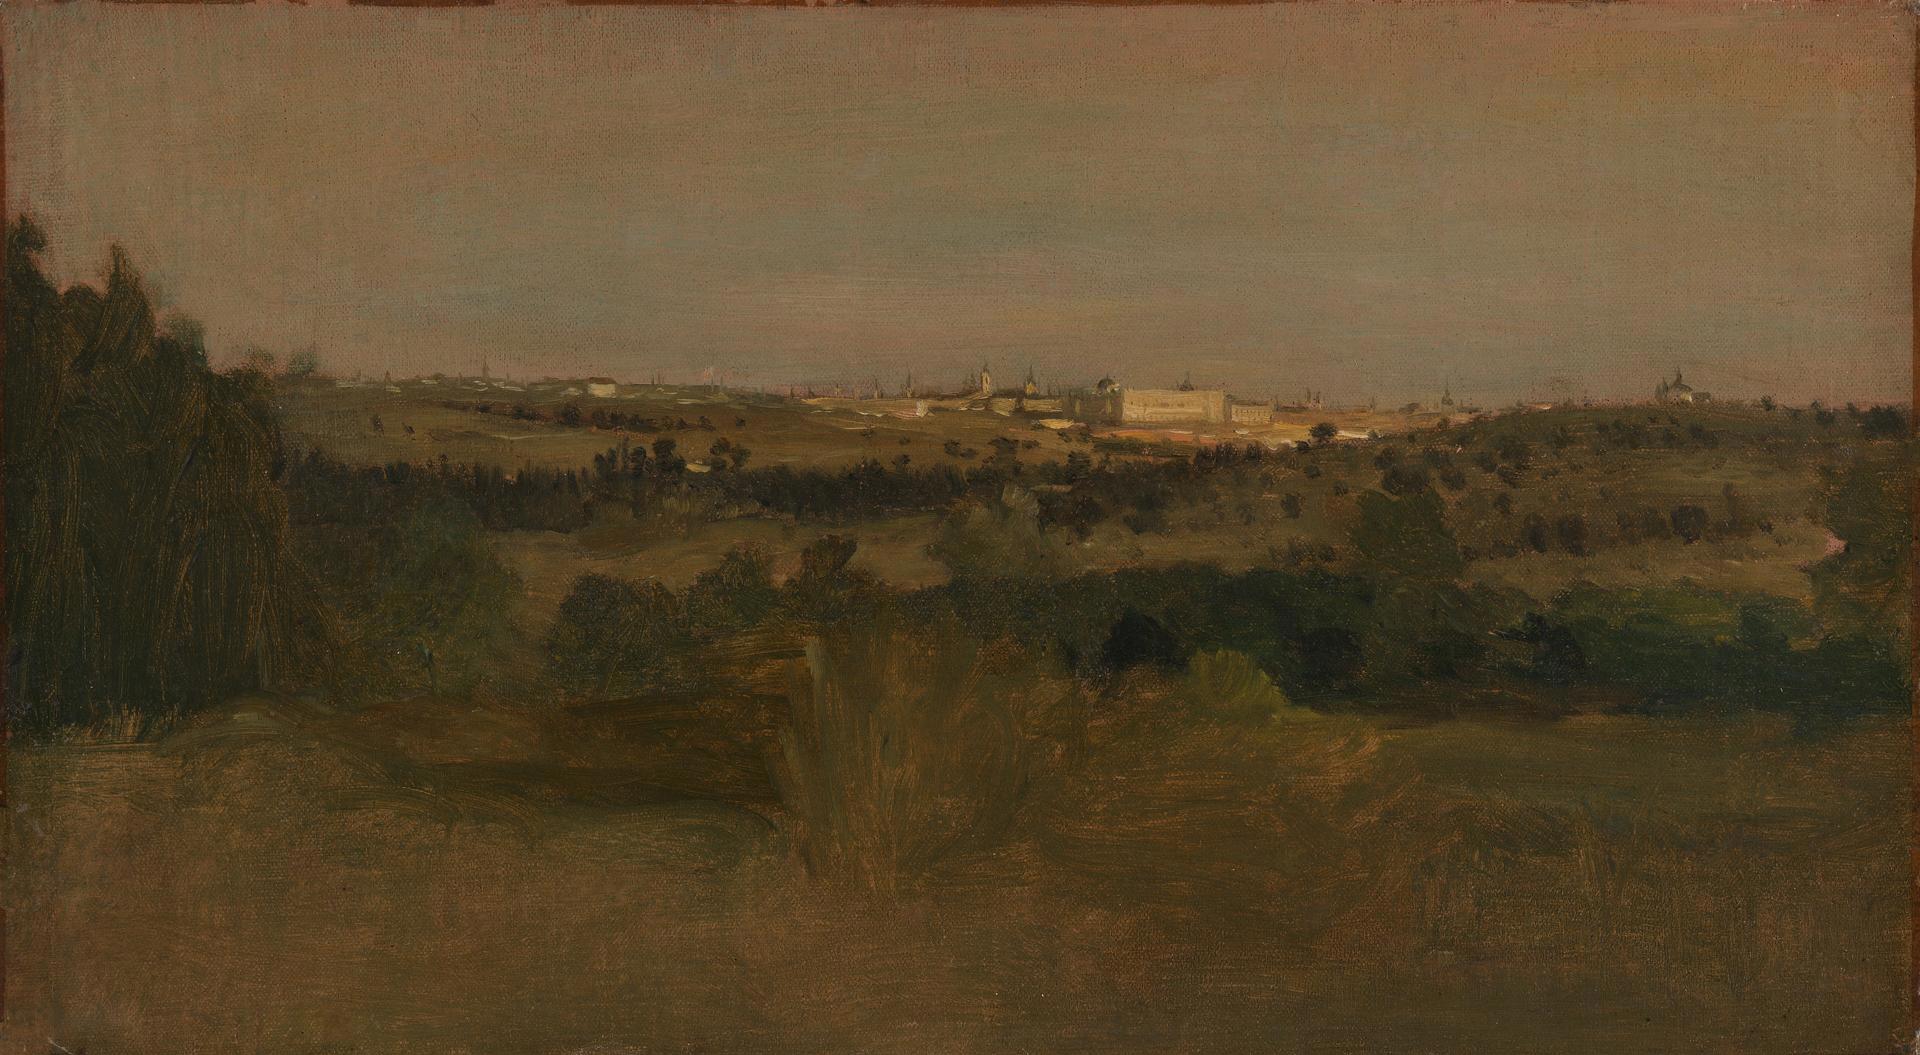 View of Madrid by Probably by Carlos de Haes